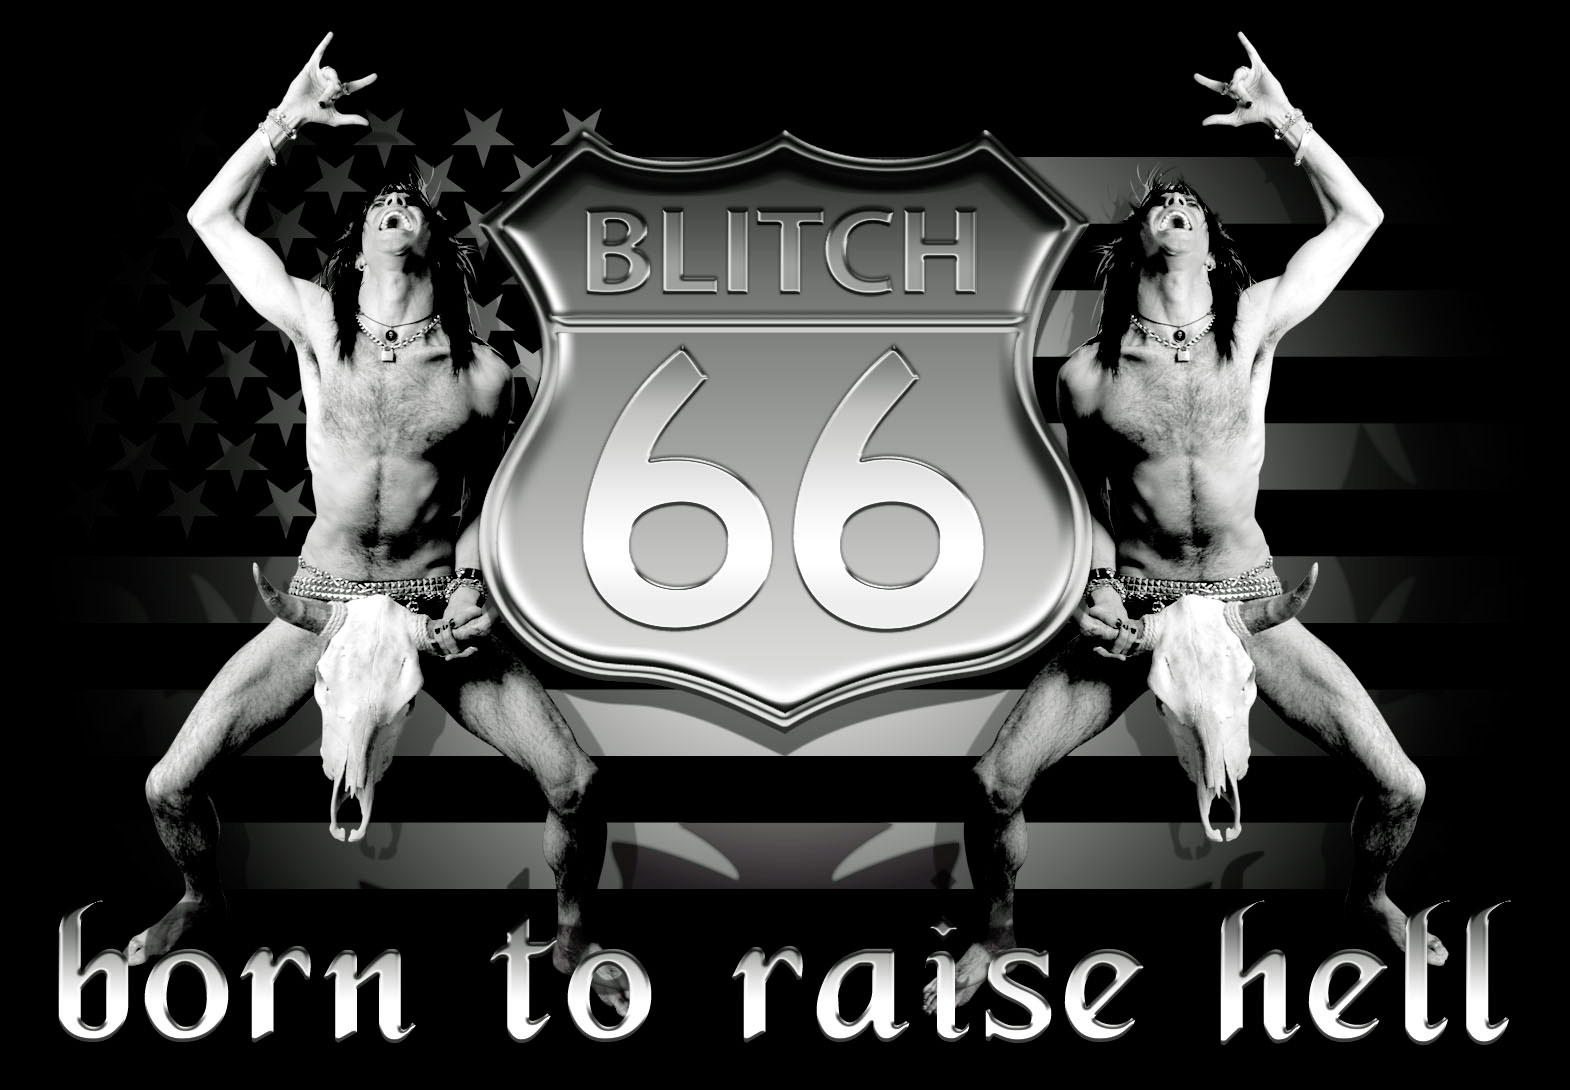 Blitch66 is the original psycho naked cowboy